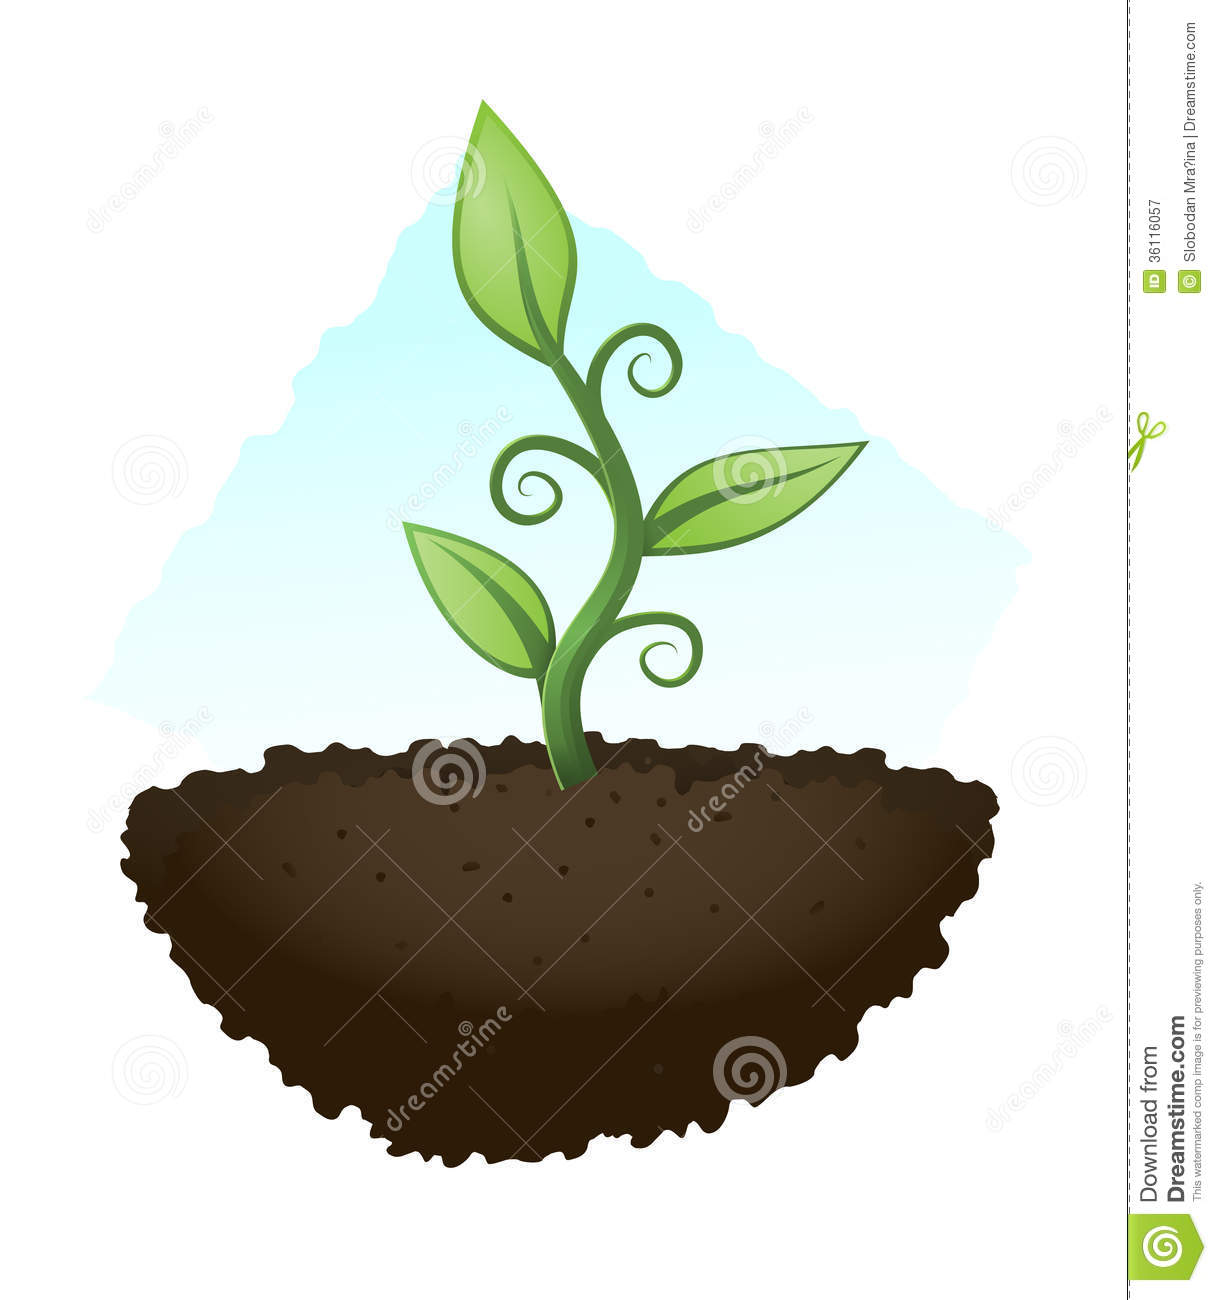 Green Plant Royalty Free Stock Photography   Image  36116057